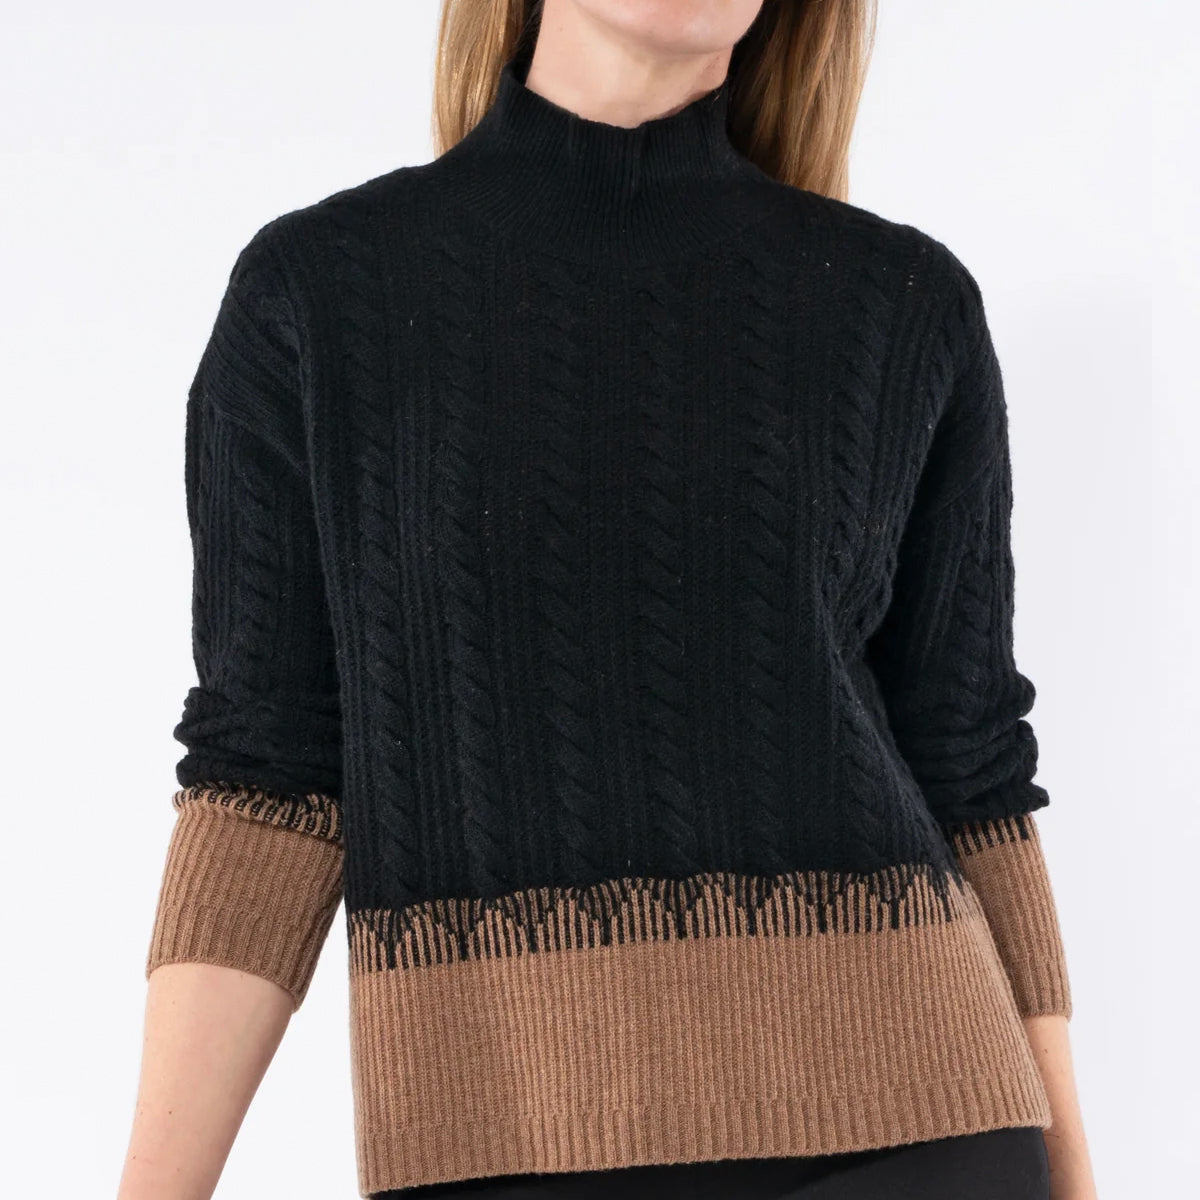 Jump Contrast Cable Pullover